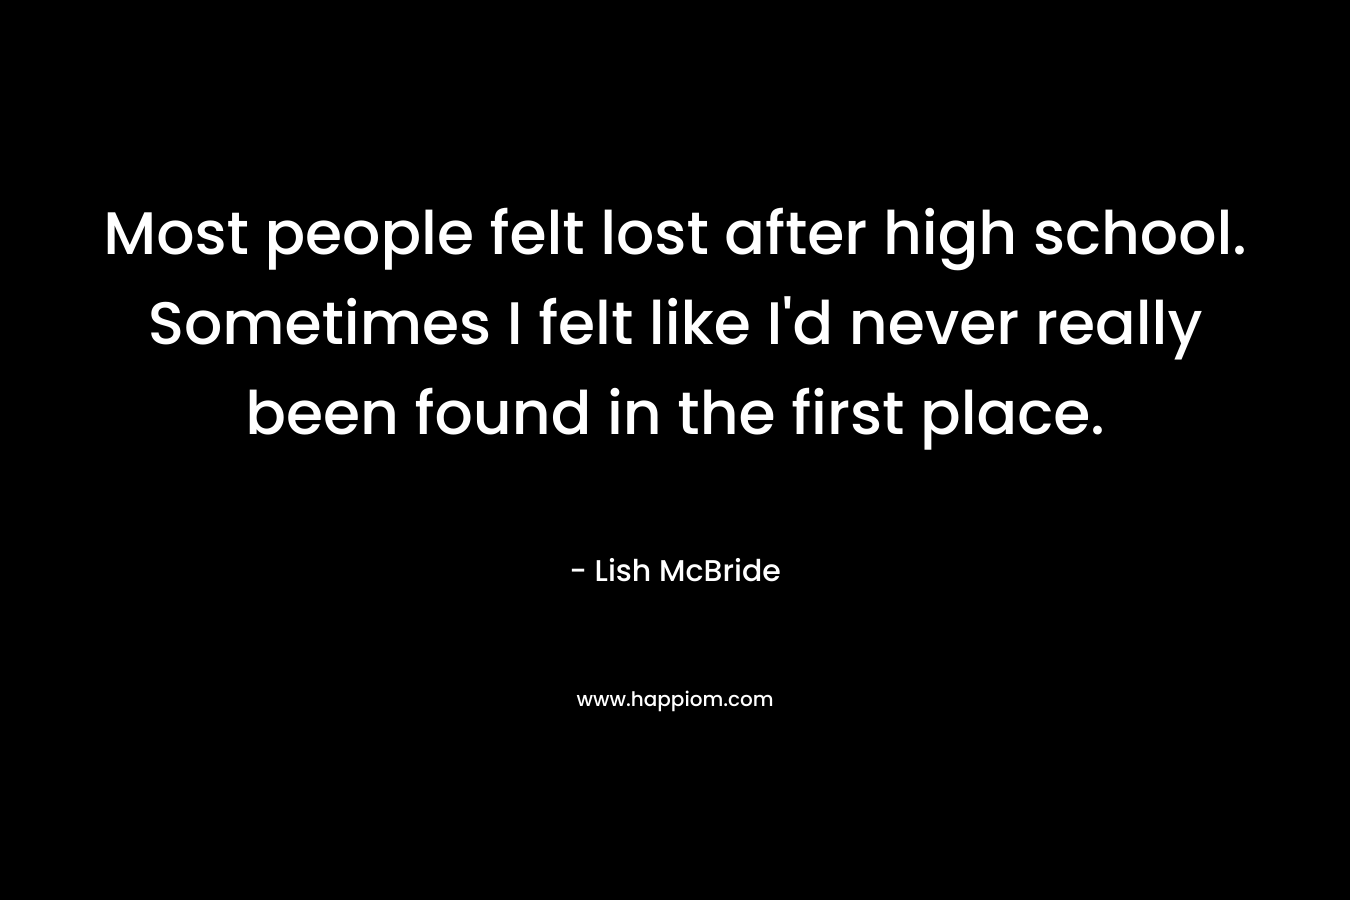 Most people felt lost after high school. Sometimes I felt like I’d never really been found in the first place. – Lish McBride